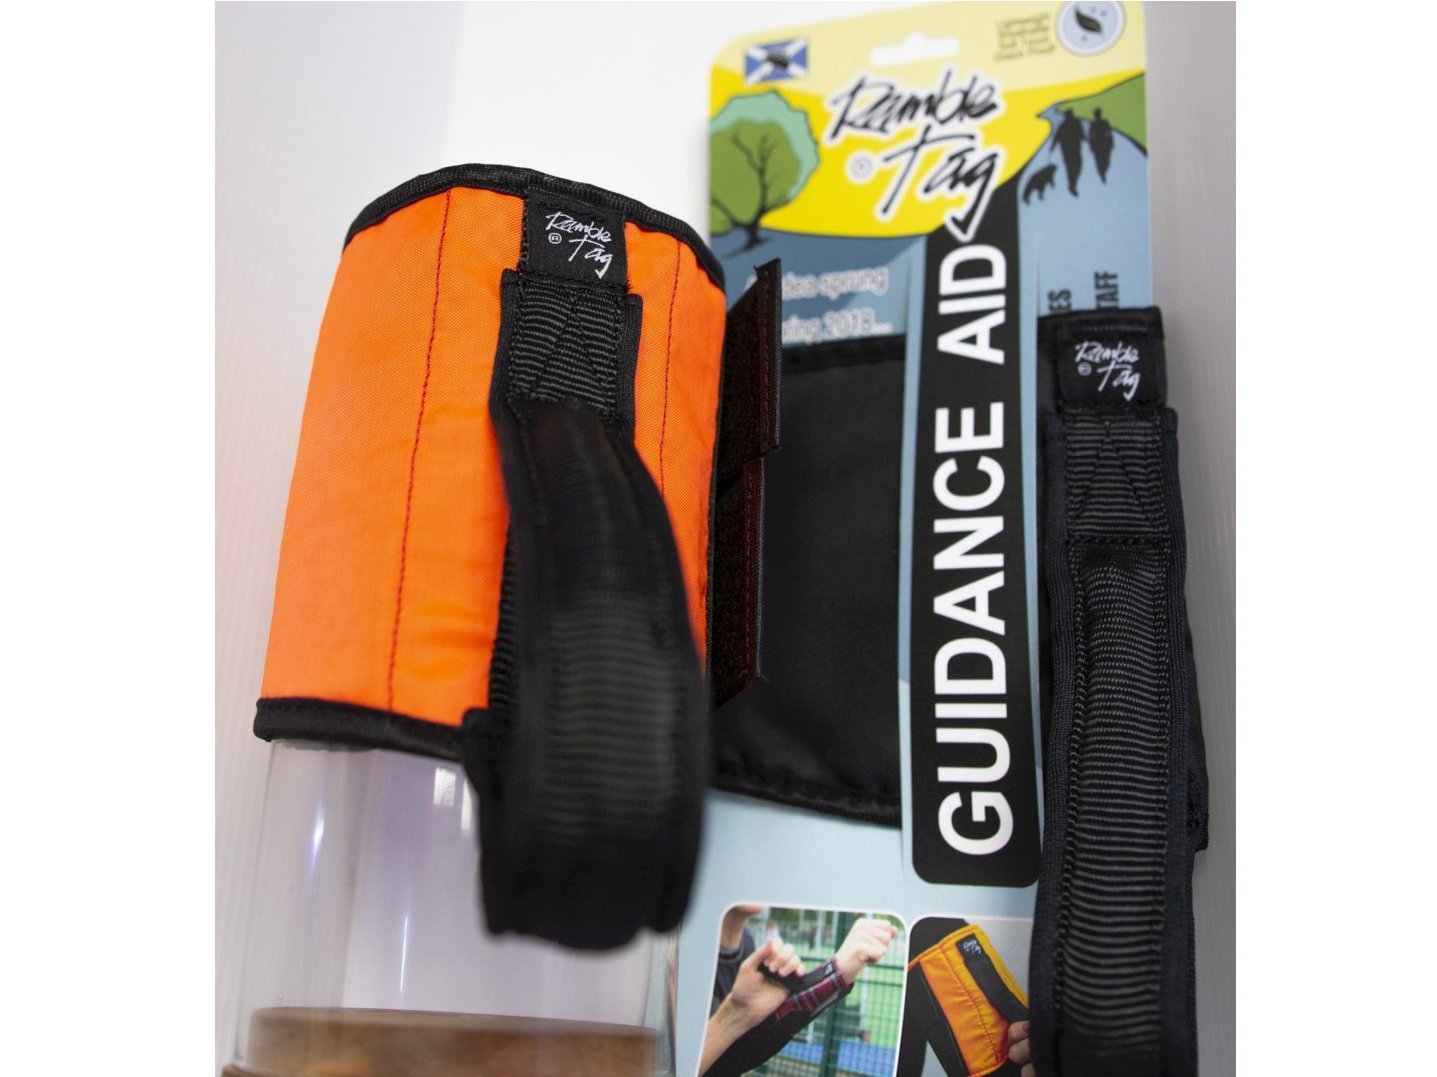 Ramble tag shown in orange water resistant fabric, consisting of a velcro cuff that can be wrapped around the upper arm and fasten with the two velcro straps at the end, and a grip handle user can hold on to as the wearer moves.